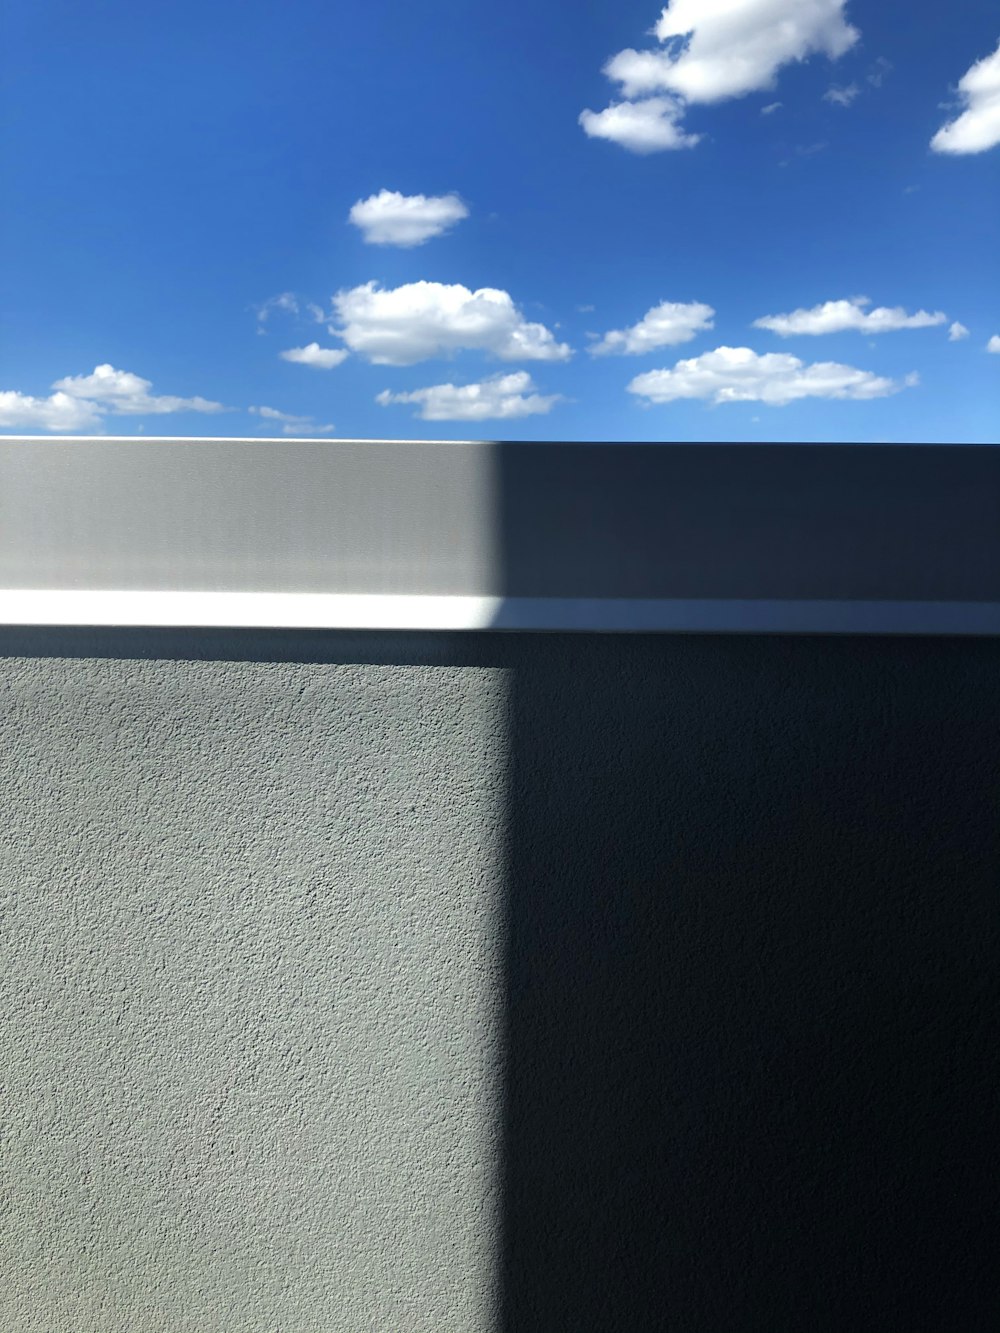 grey concrete wall under blue sky and white clouds during daytime